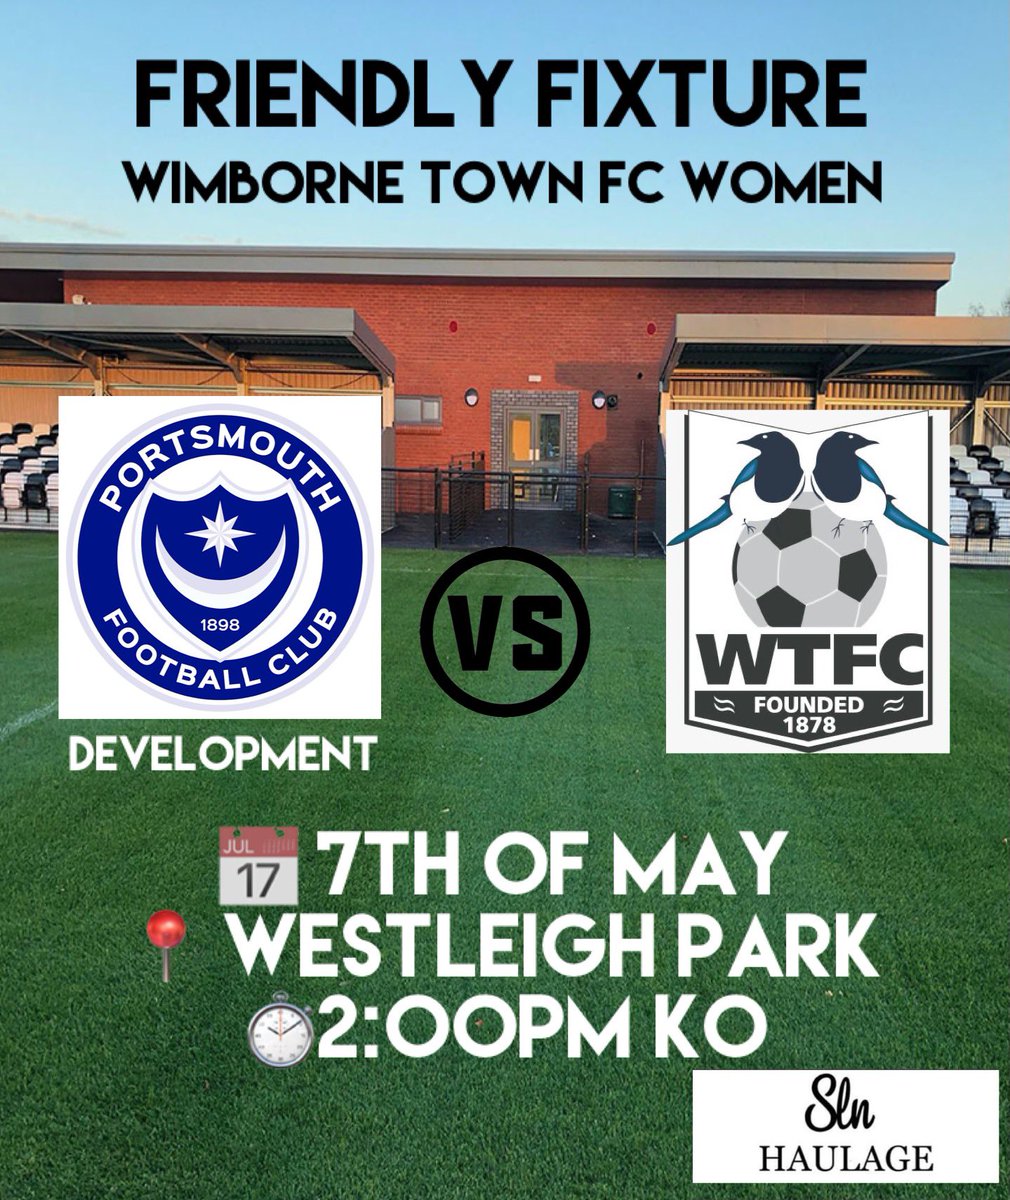 Due to not having a league fixture we are playing Portsmouth Development team in a freindly match at Westleigh Park. 

Please come and support us this weekend ⚫️⚪️⚽️